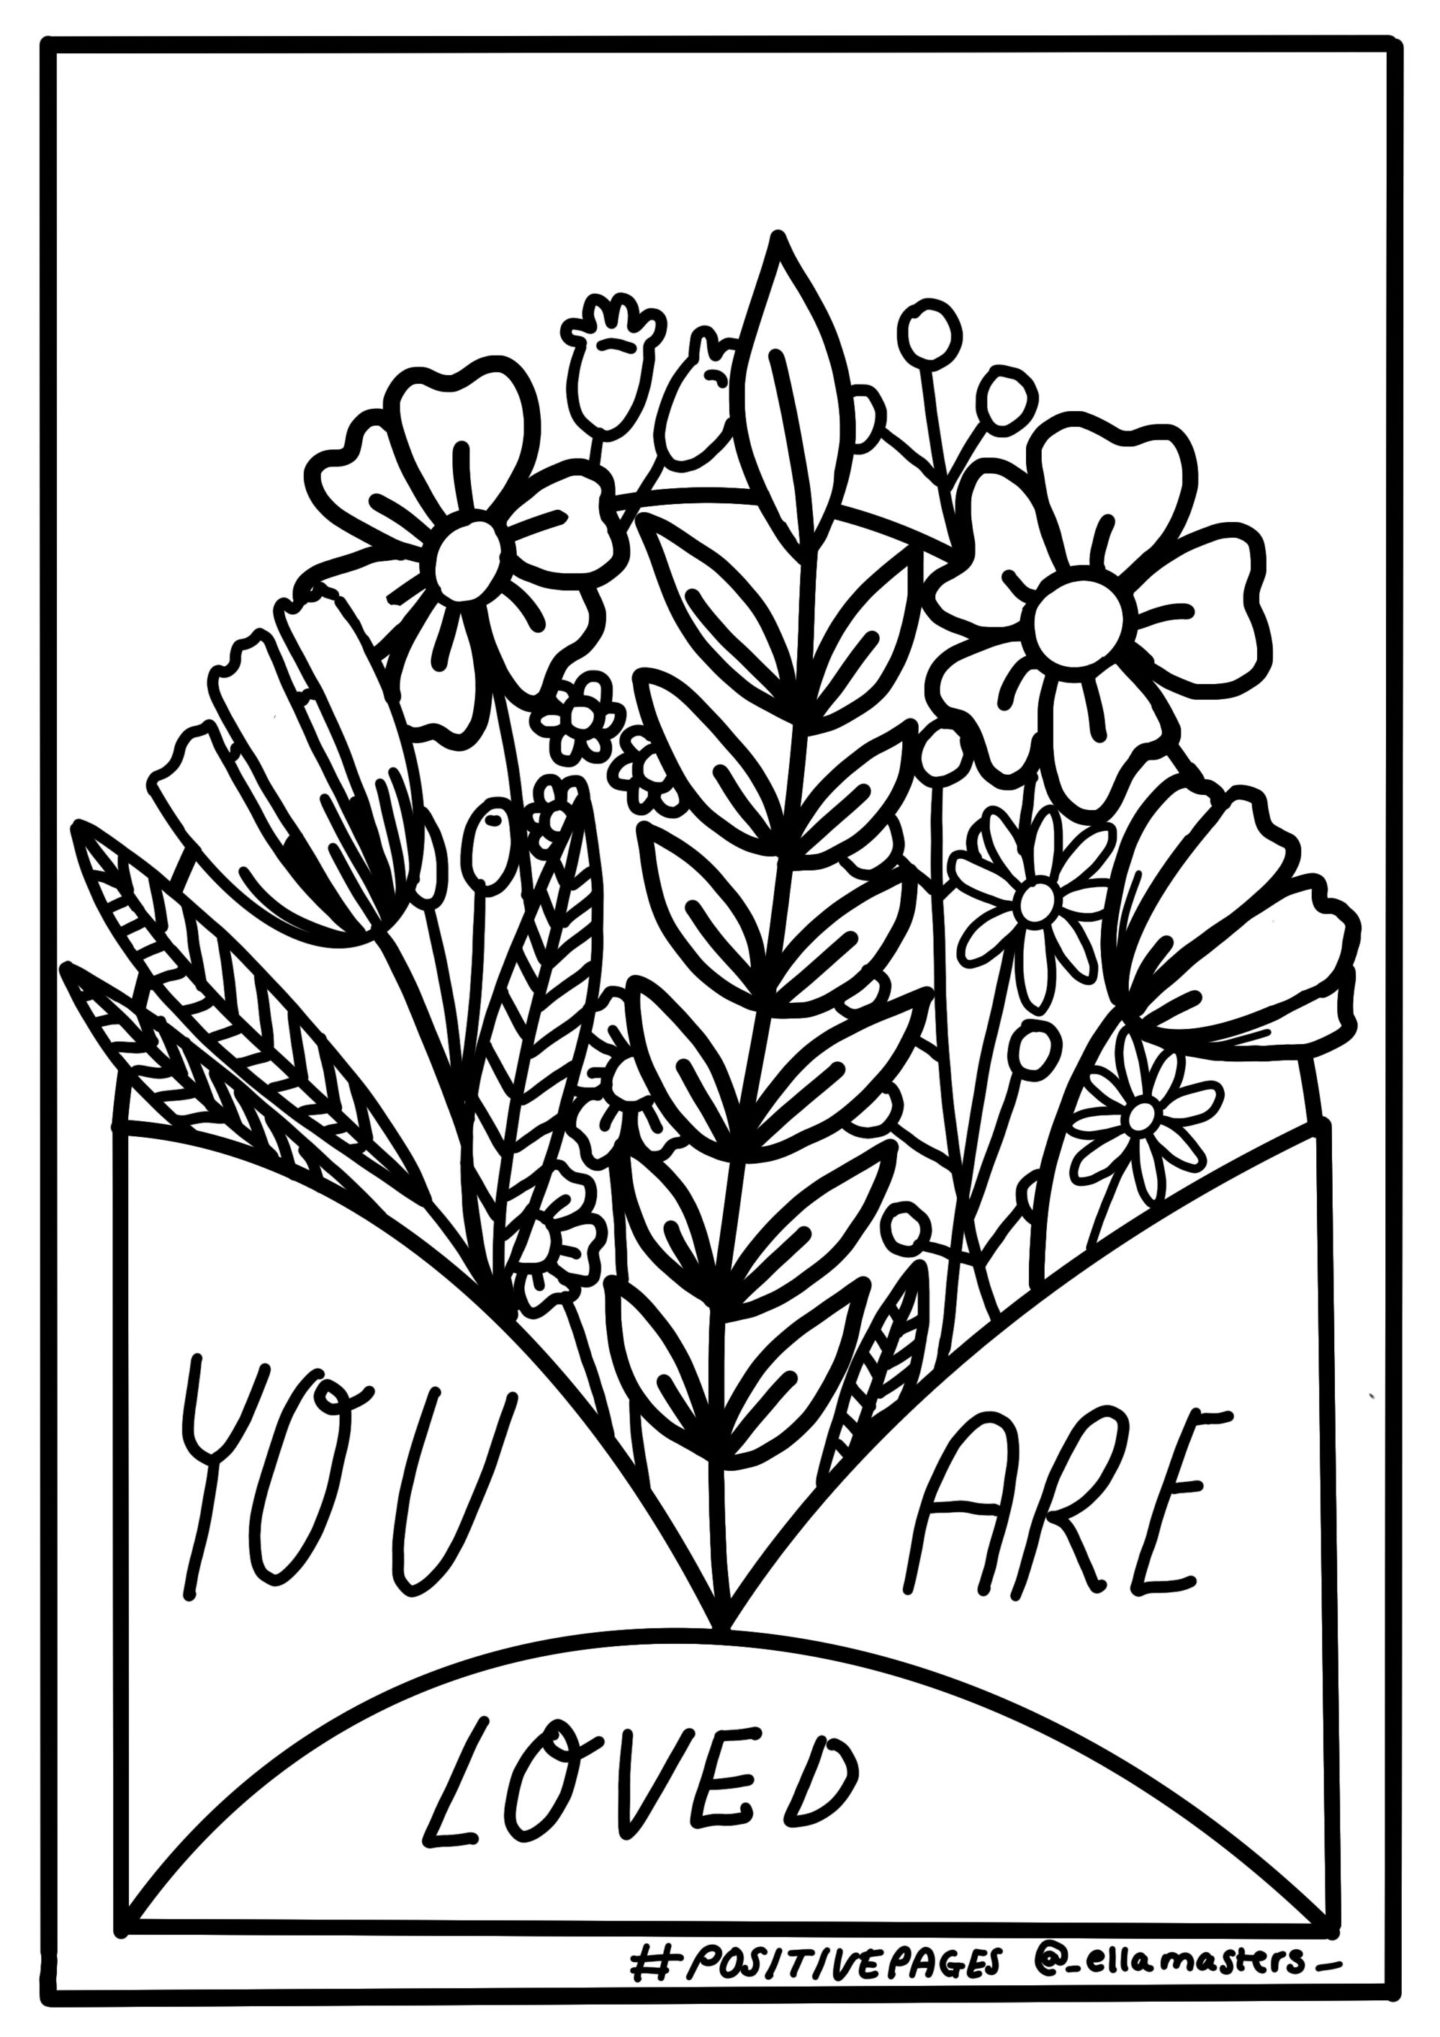 #POSITIVEPAGES downloadable colouring in page for people to print at home